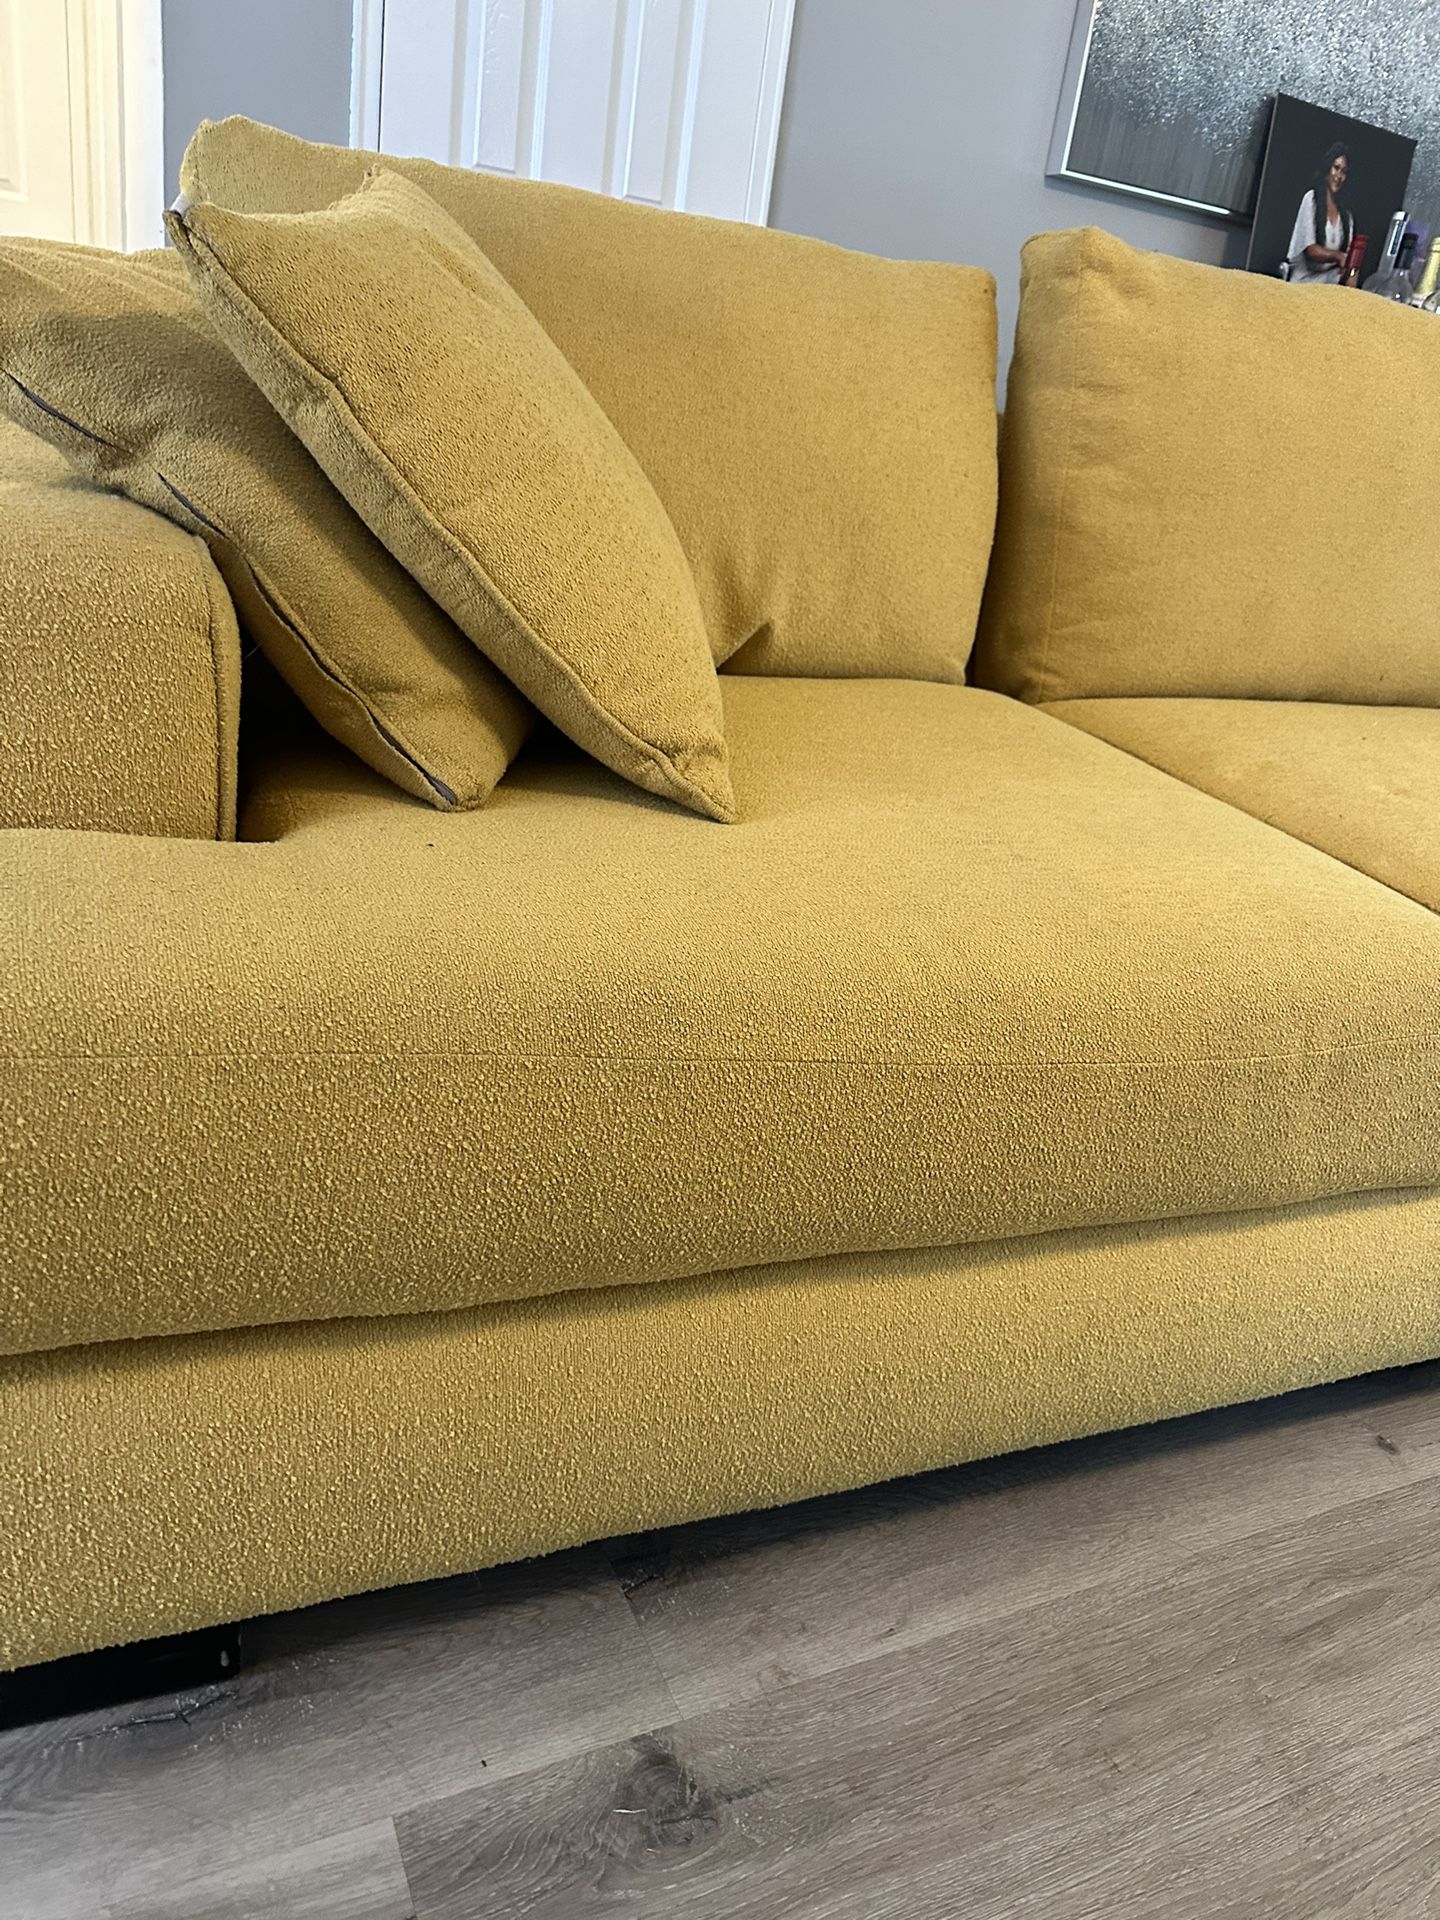 Beautiful Yellow “Living Spaces” Sectional Couch